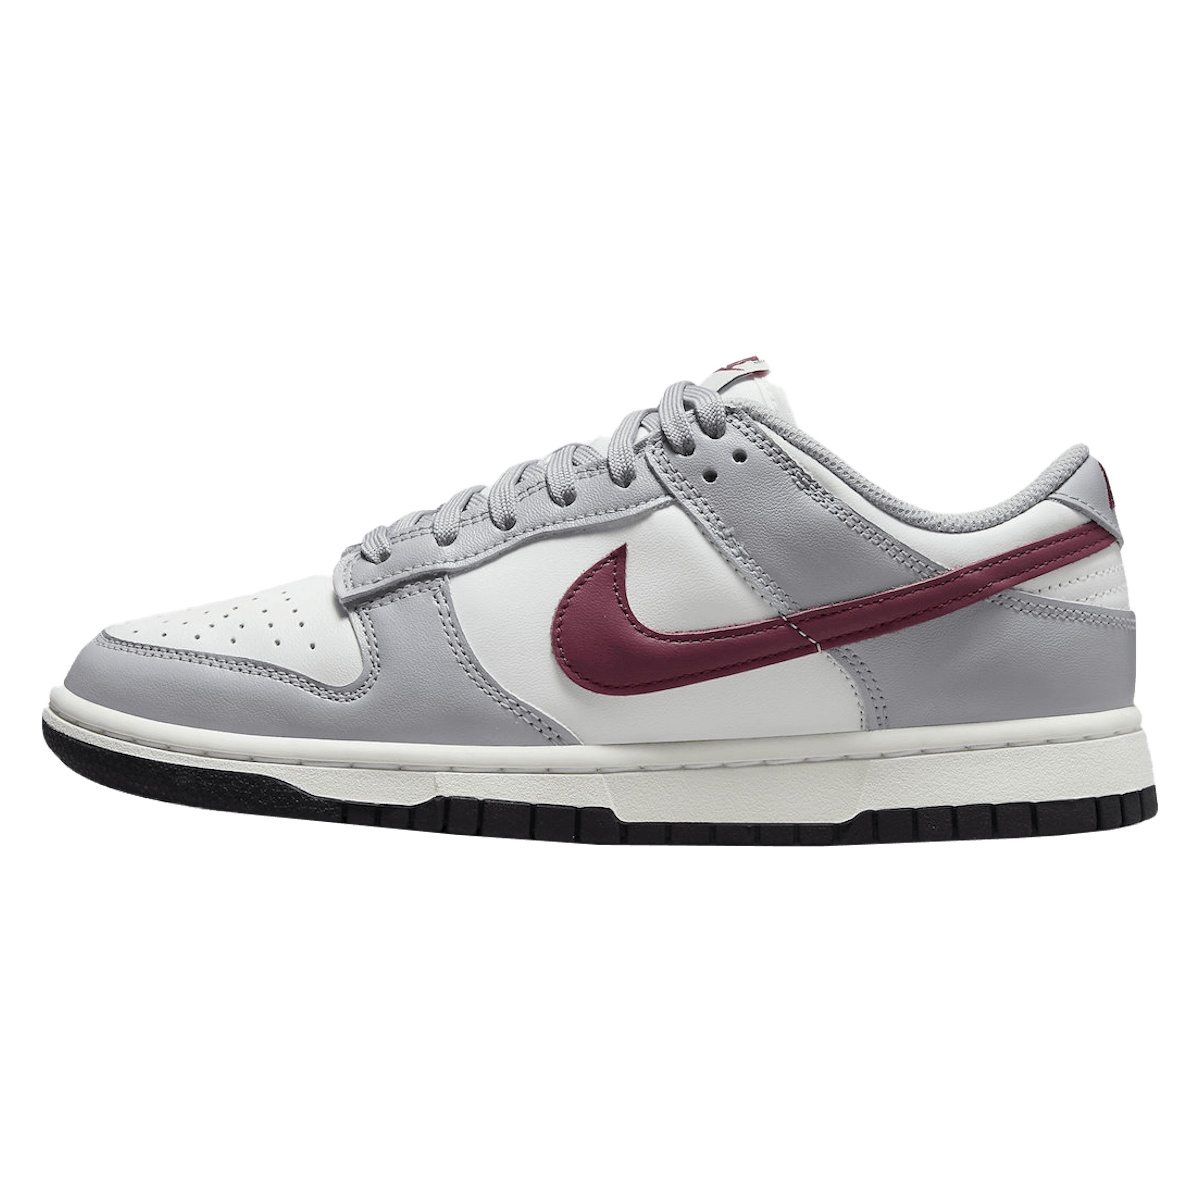 Nike Dunk Low "Pale Ivory Redwood"